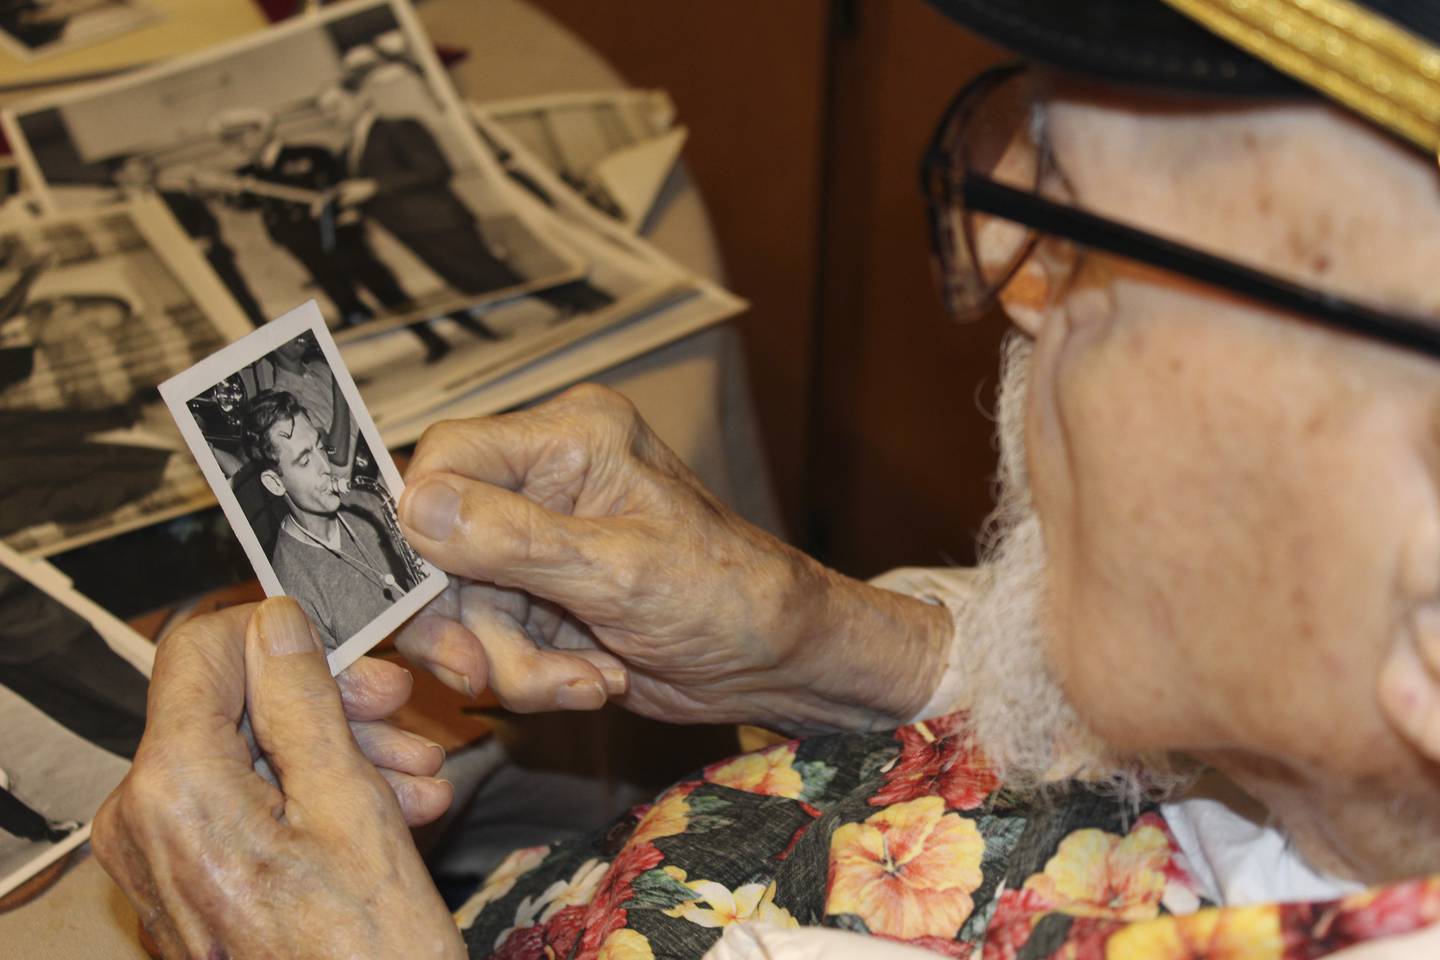 Pearl Harbor survivor Ira "Ike" Schab, 103, looks at an old photo of himself with a saxophone while sitting at the kitchen table in his home in Beaverton, Ore. on Monday, Nov. 20, 2023.